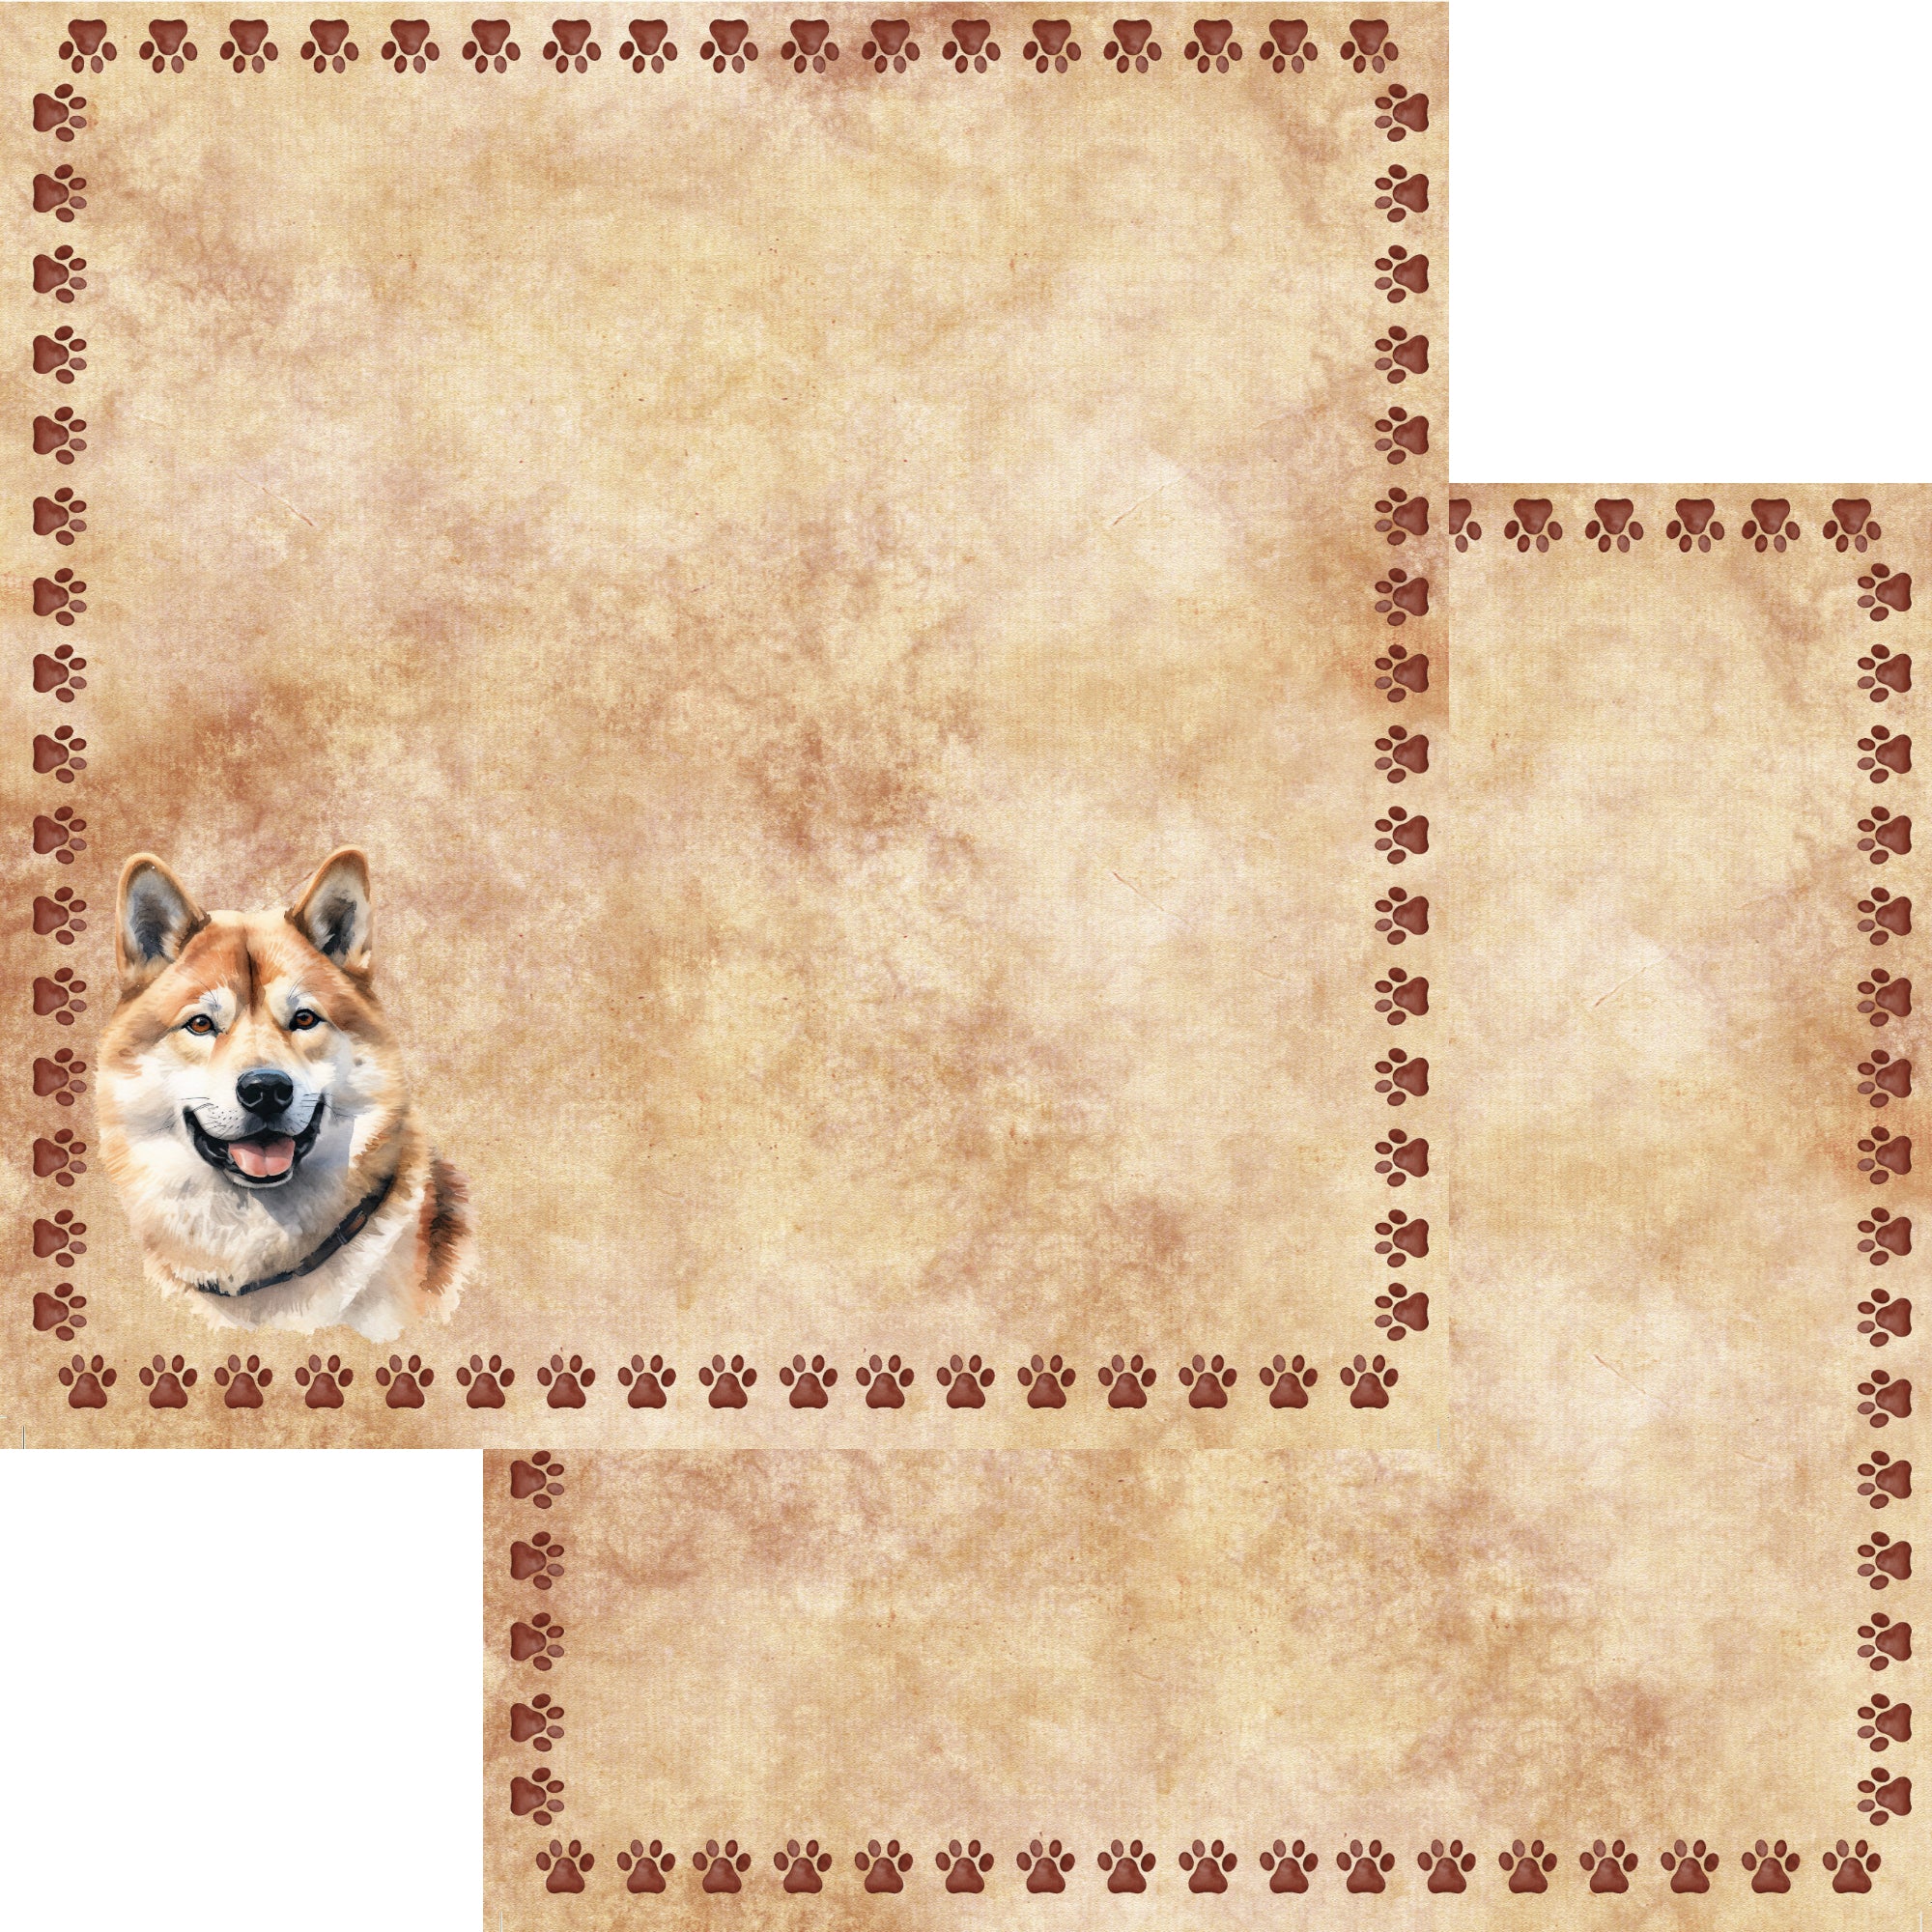 Dog Breeds Collection Akita 12 x 12 Double-Sided Scrapbook Paper by SSC Designs